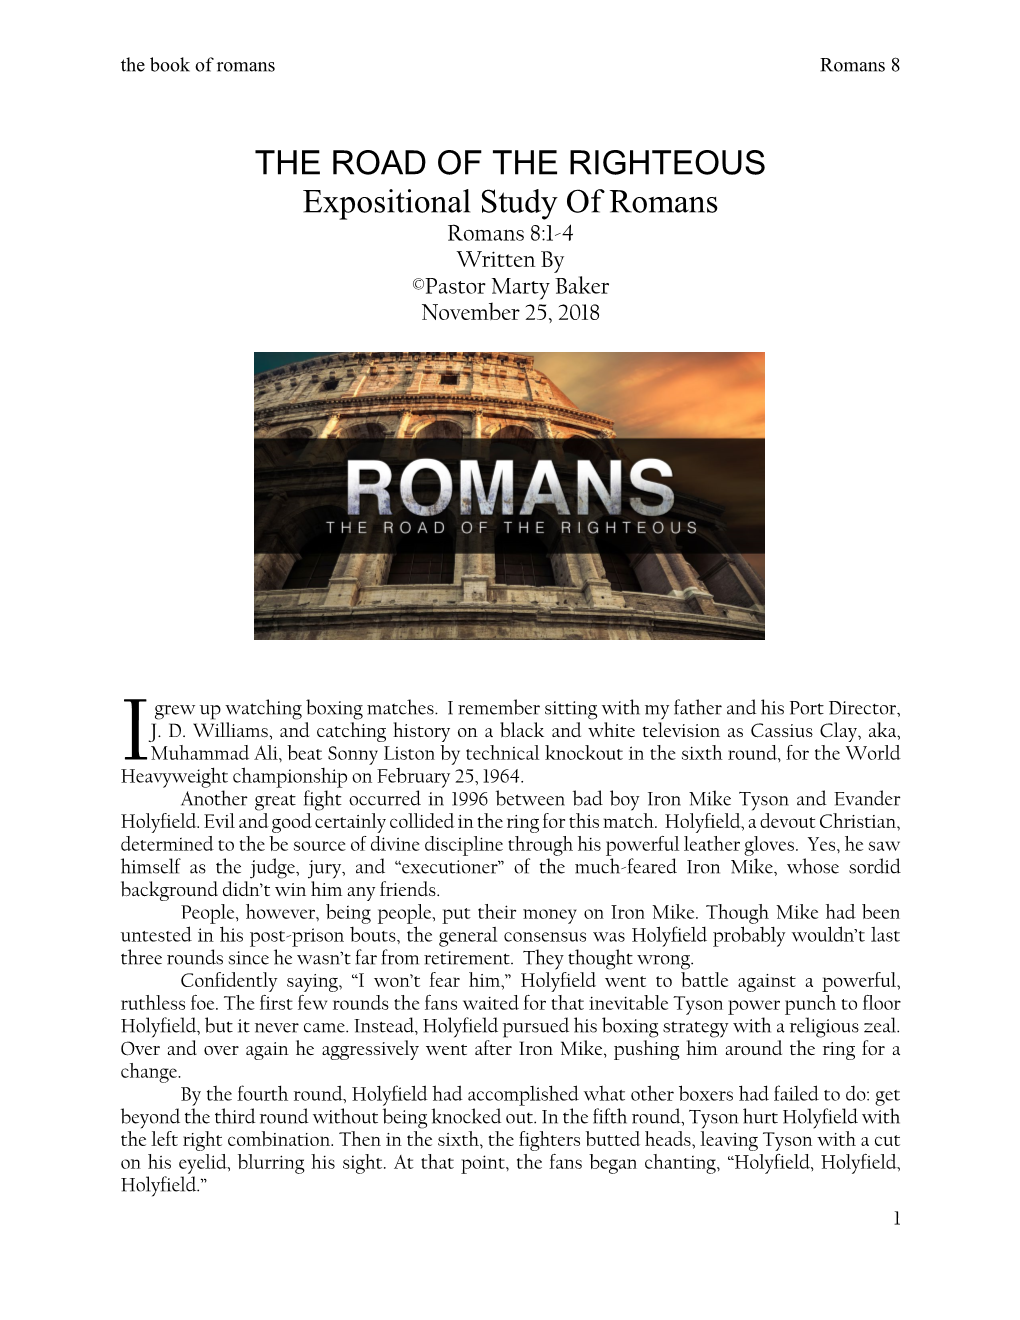 THE ROAD of the RIGHTEOUS Expositional Study of Romans Romans 8:1-4 Written by ©Pastor Marty Baker November 25, 2018